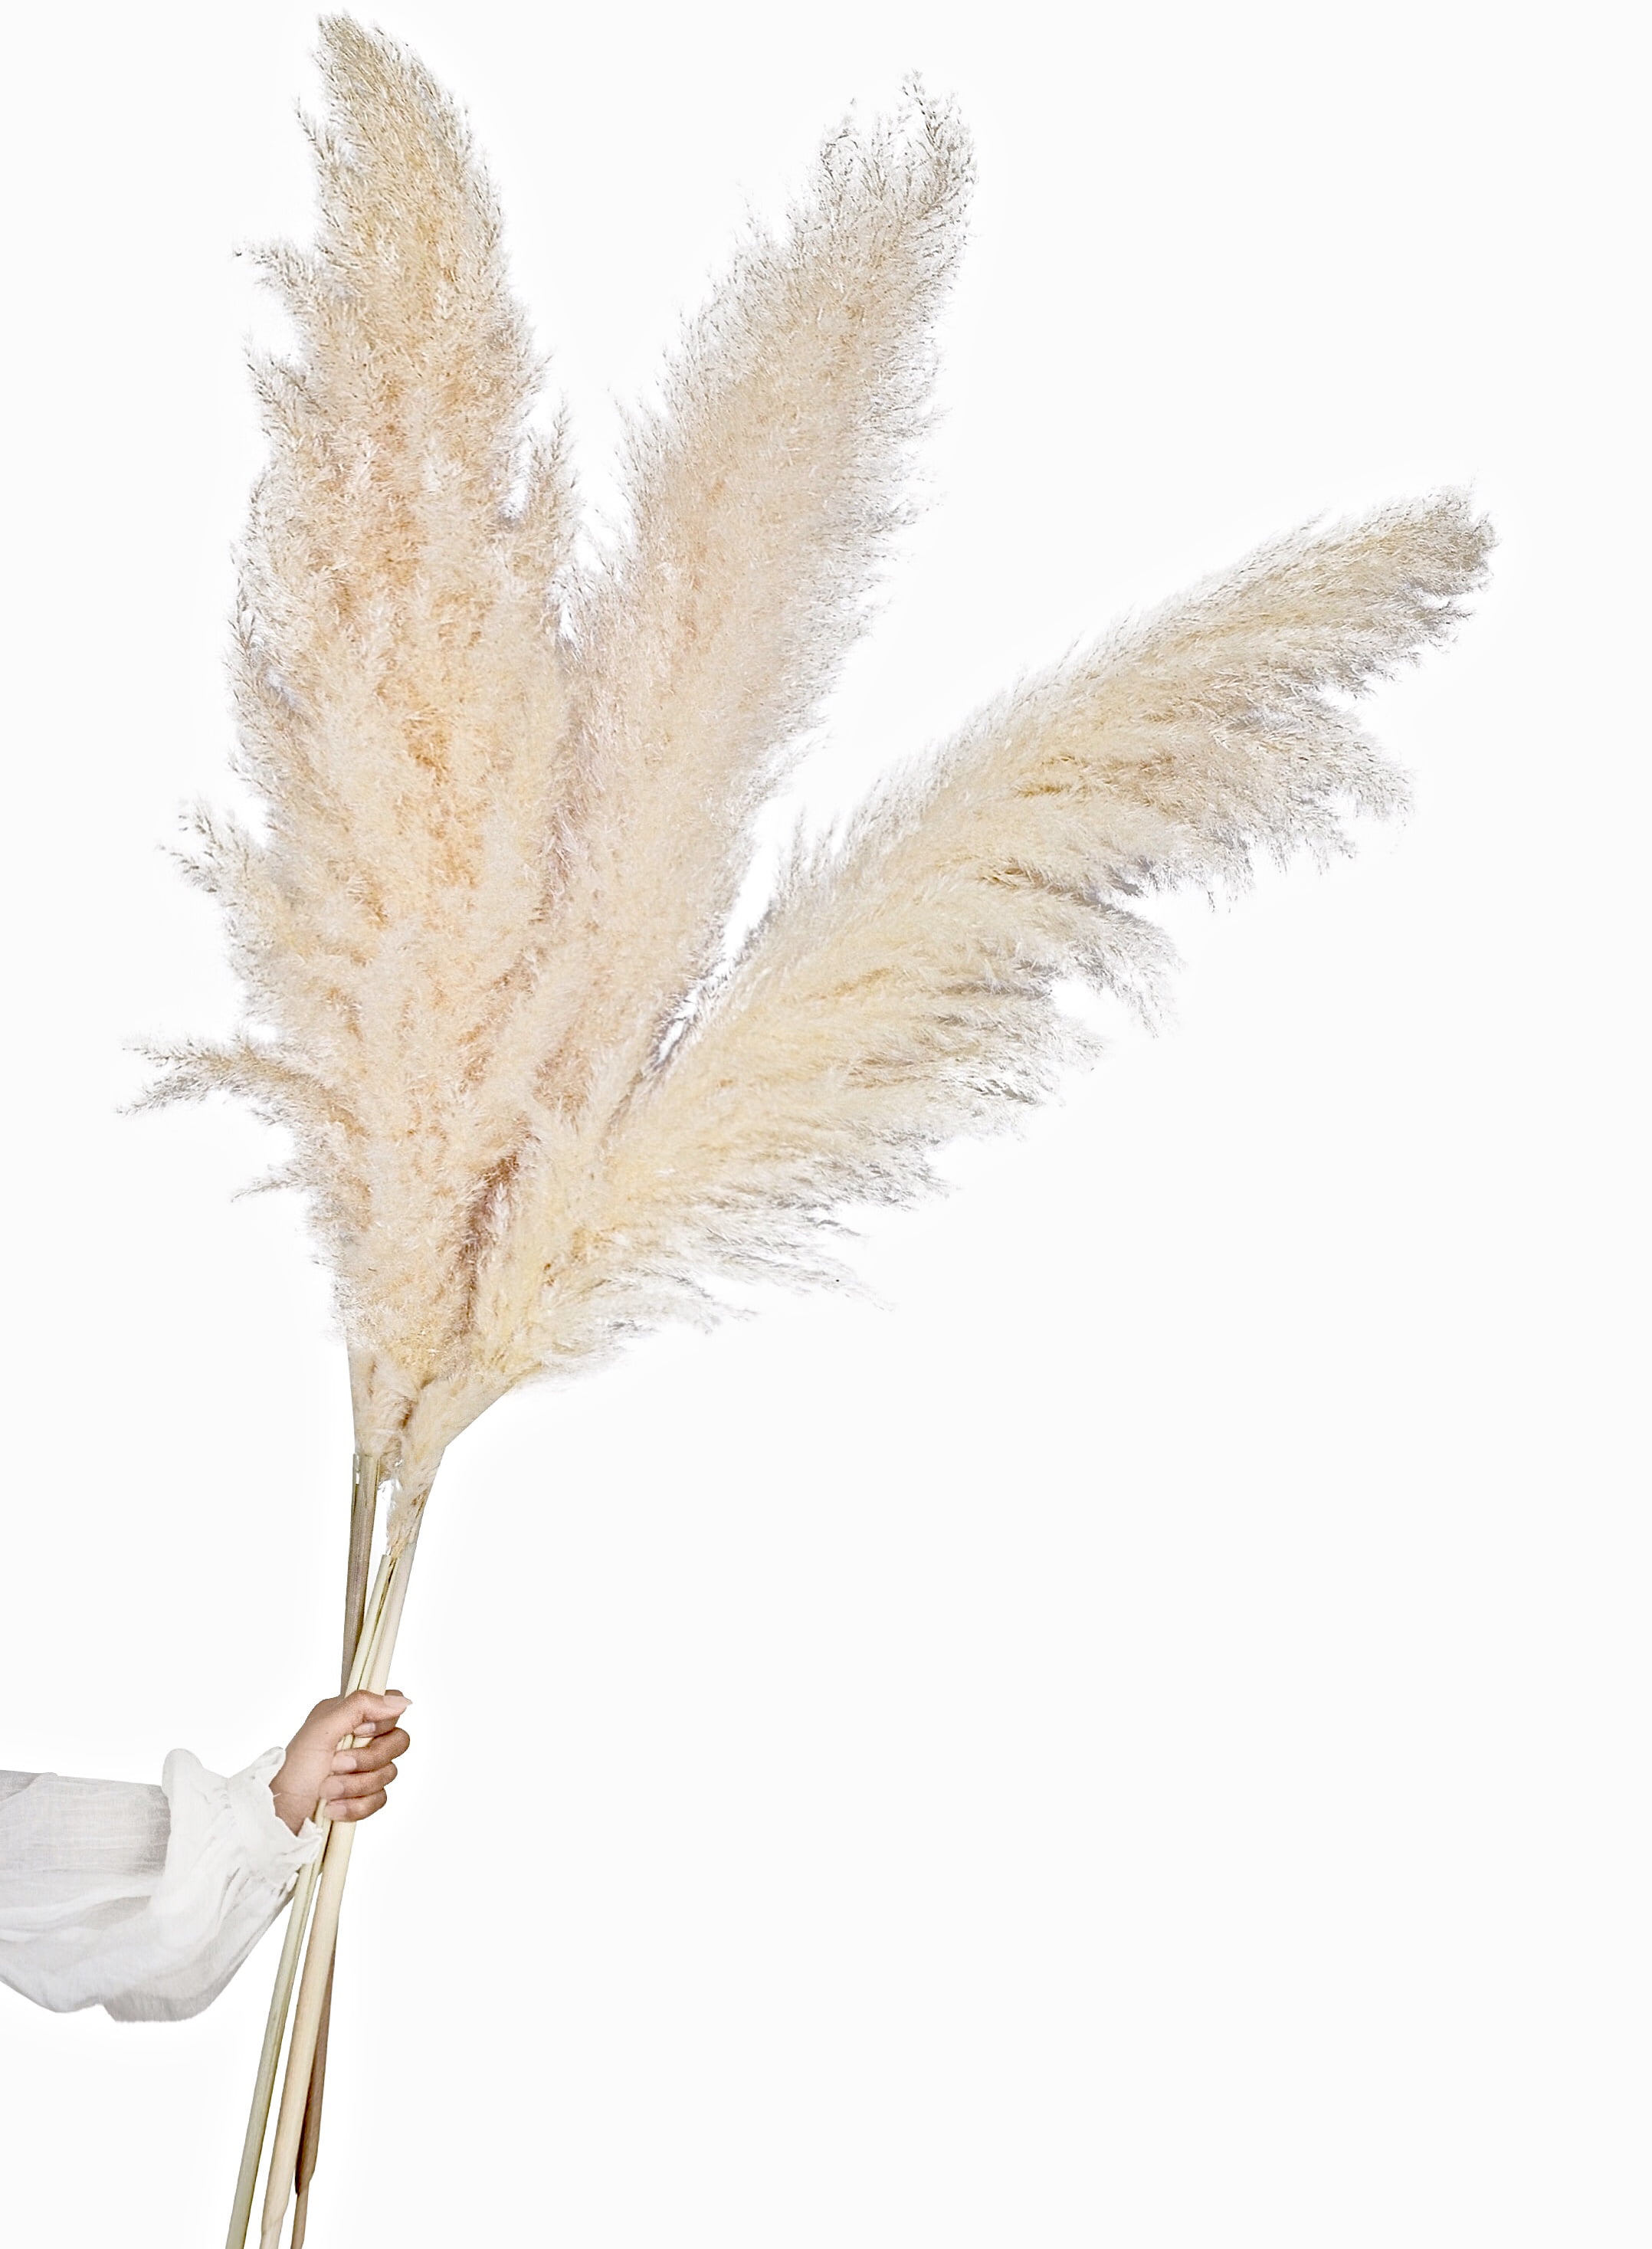 20 Stems Boho Style 24 INCHES LONG Natural Dried Pampas Grass FREE Shipping